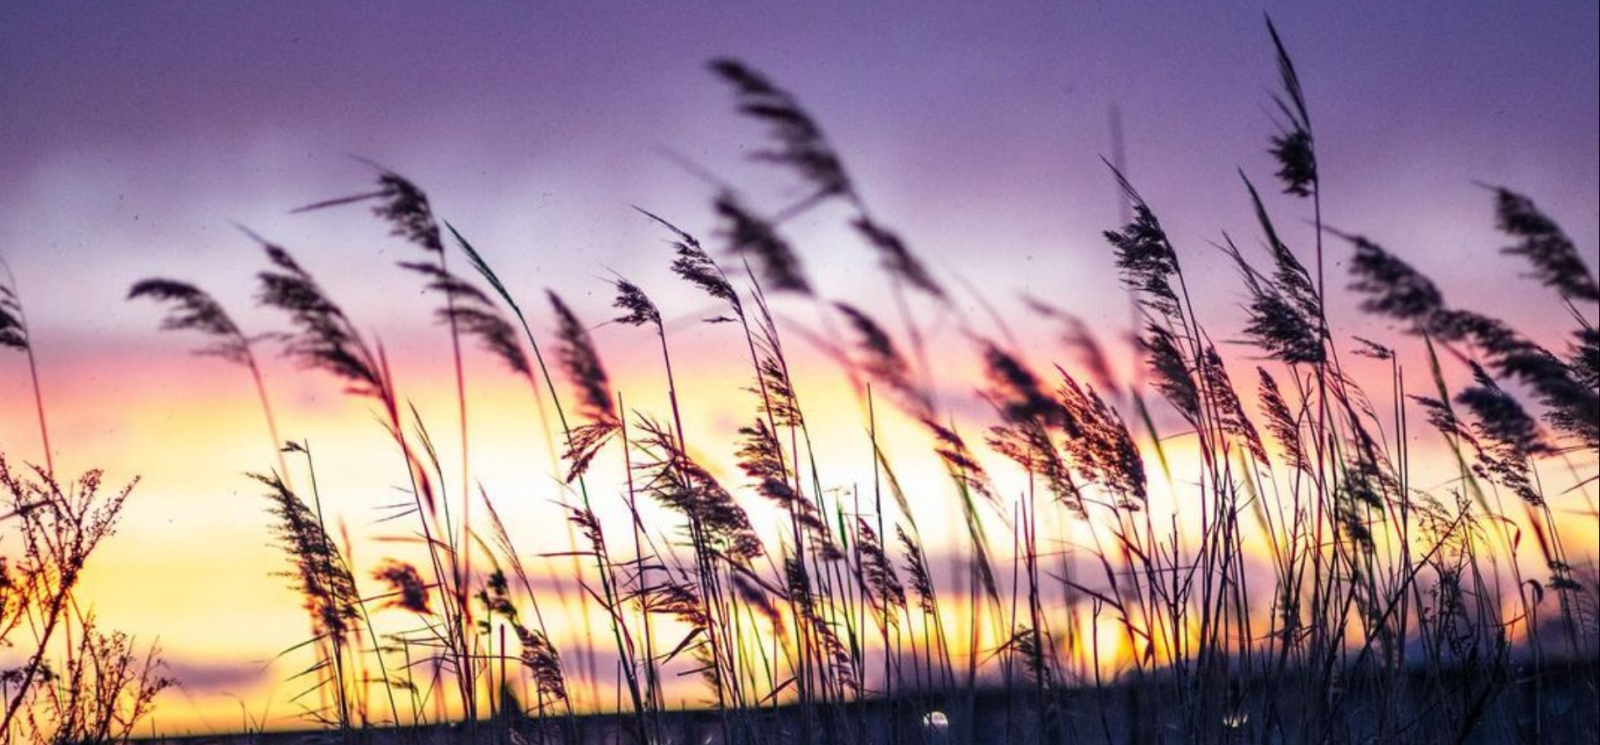 A sunset through the reeds at the beach (Instagram@captured_byjae)